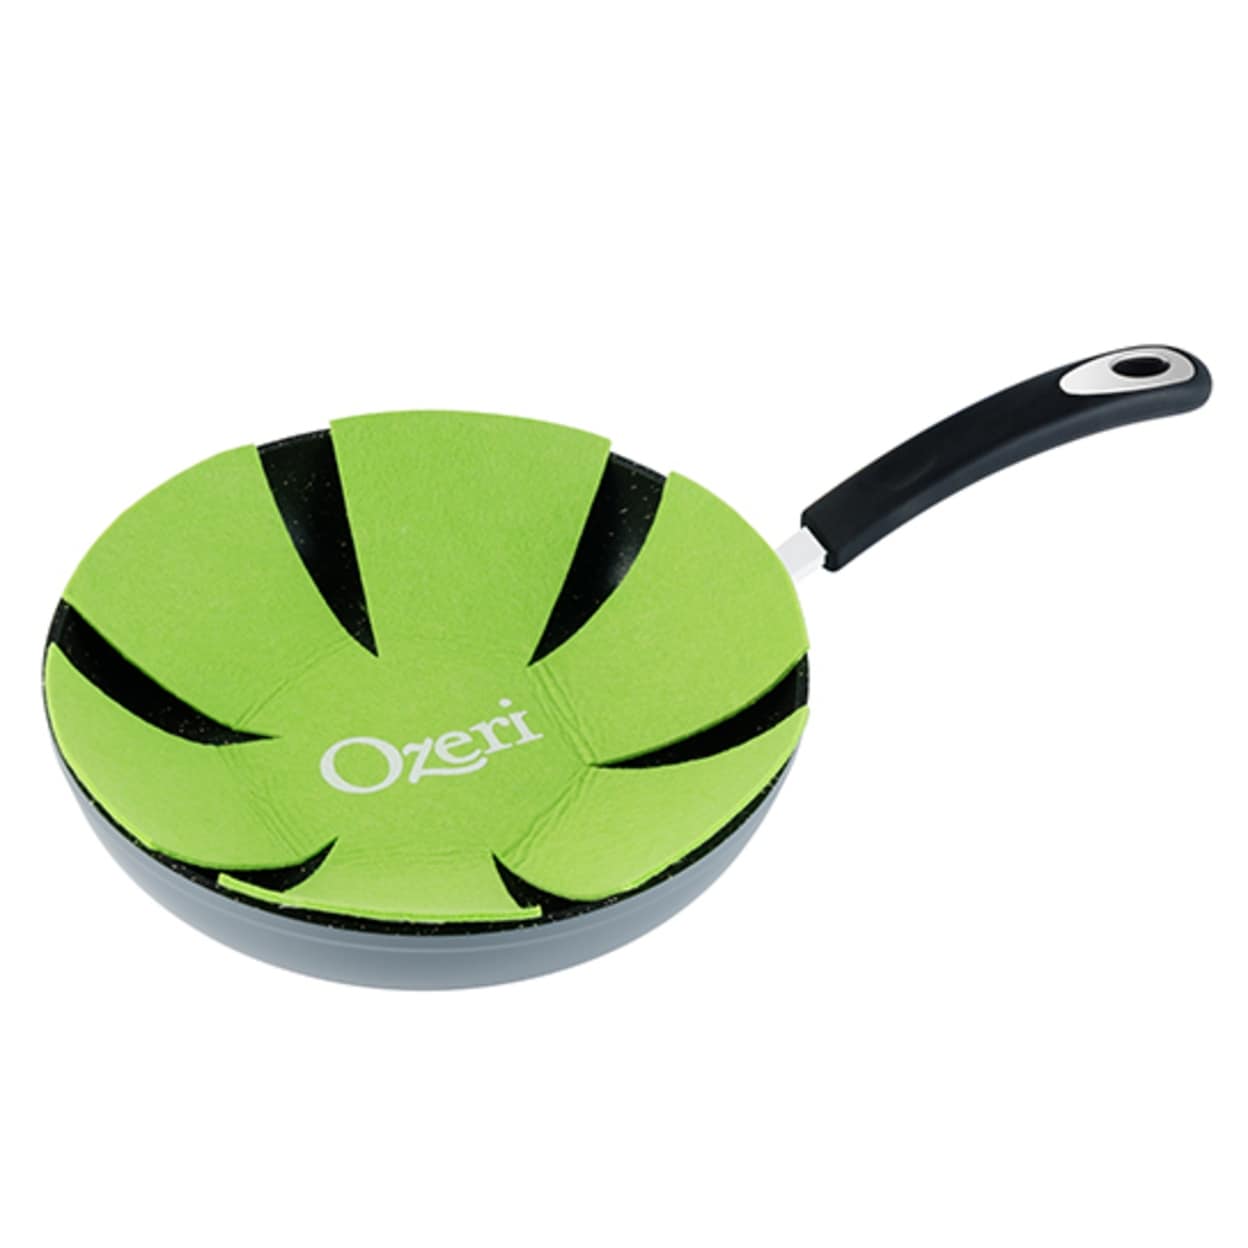 12in Stone Frying Pan By Ozeri With 100percent Apeo And PfoaFree  StoneDerived NonStick Coating From Germany - Grey - 12 - Bed Bath & Beyond  - 32504397